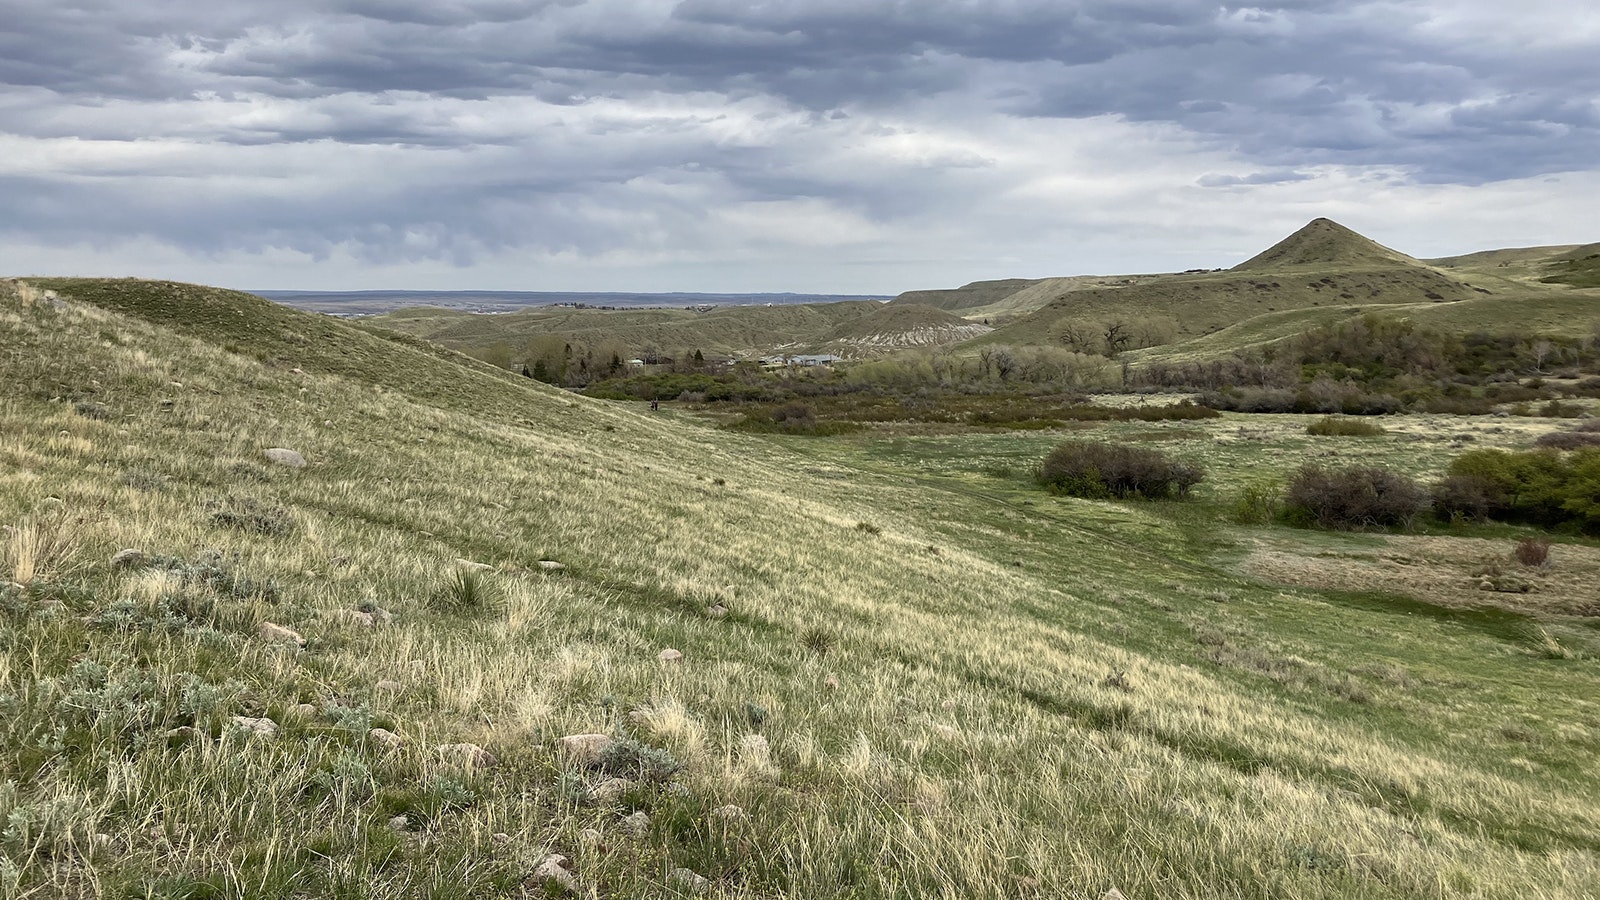 A view looking toward Casper from the School Creek section of land at the base of Casper Mountain.